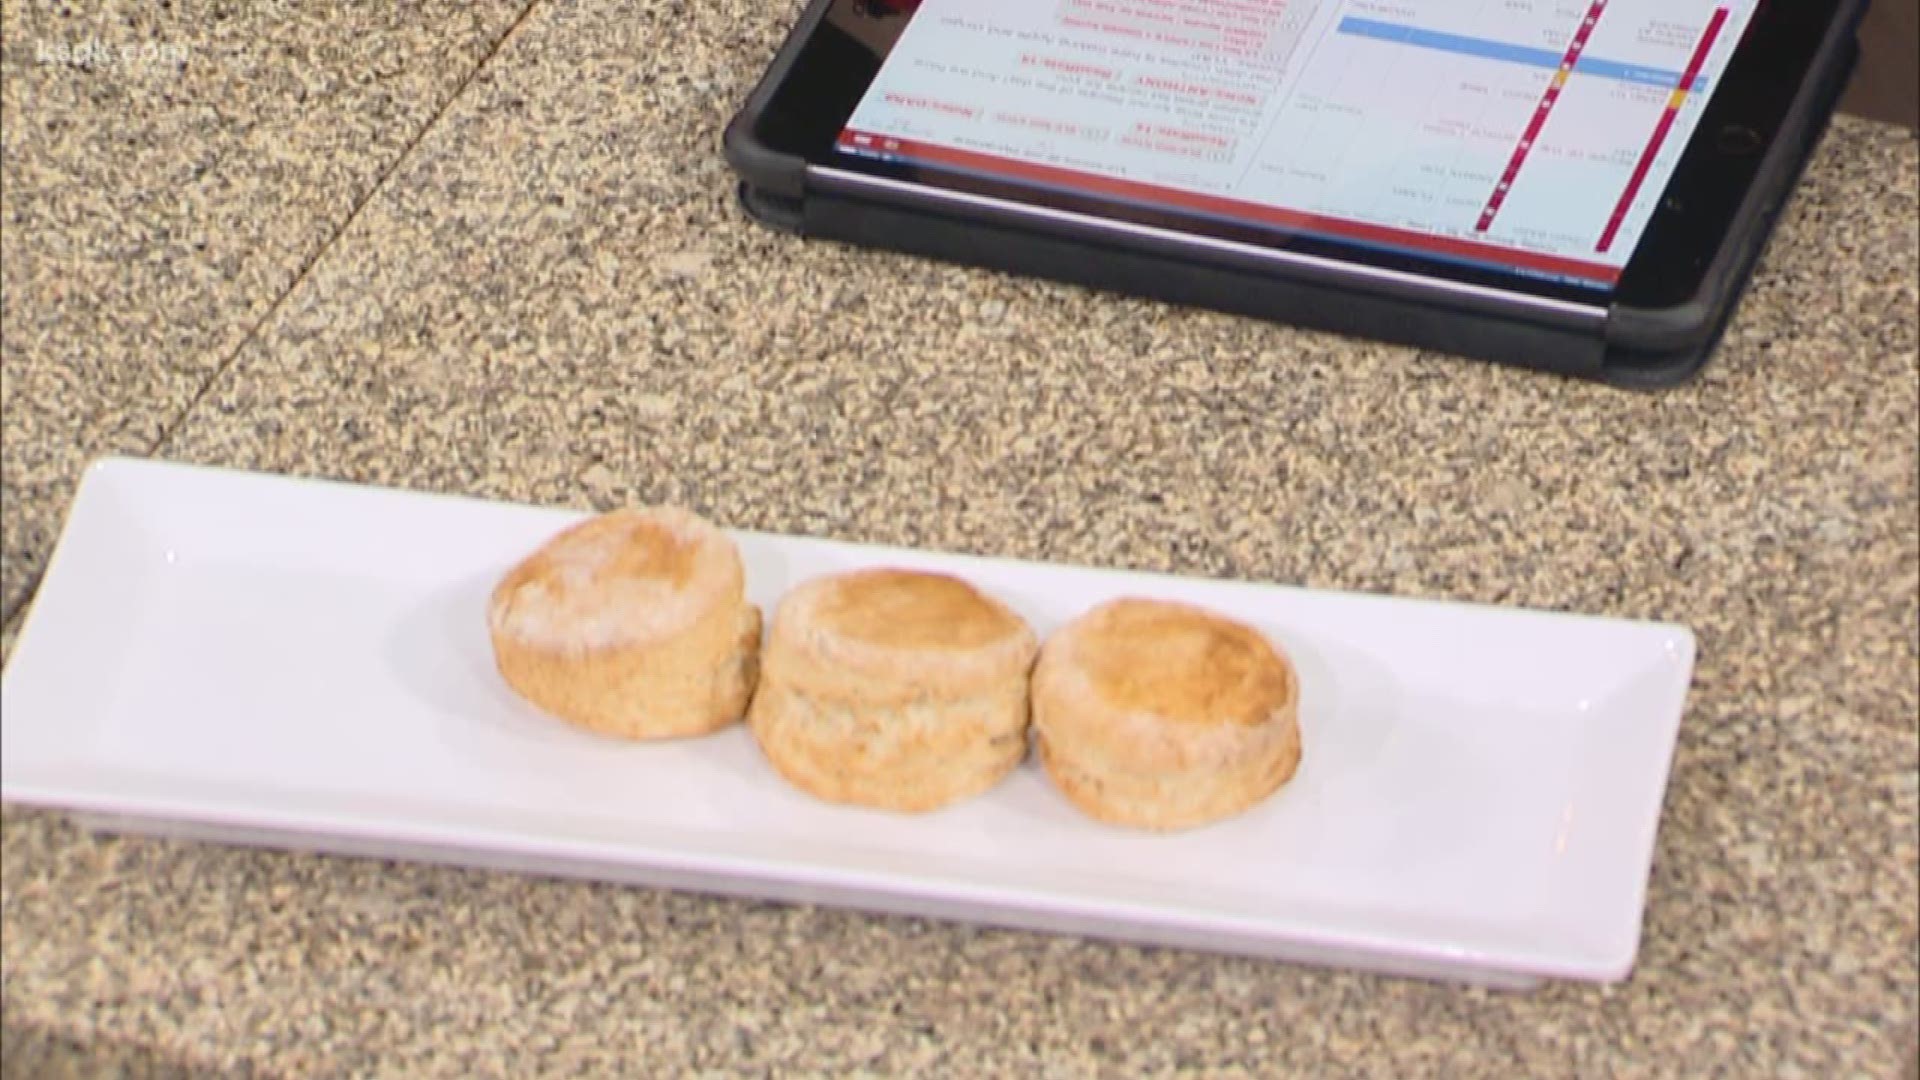 Chef Josh Charles whipped up a delicious recipe that’s perfect for this time of year.